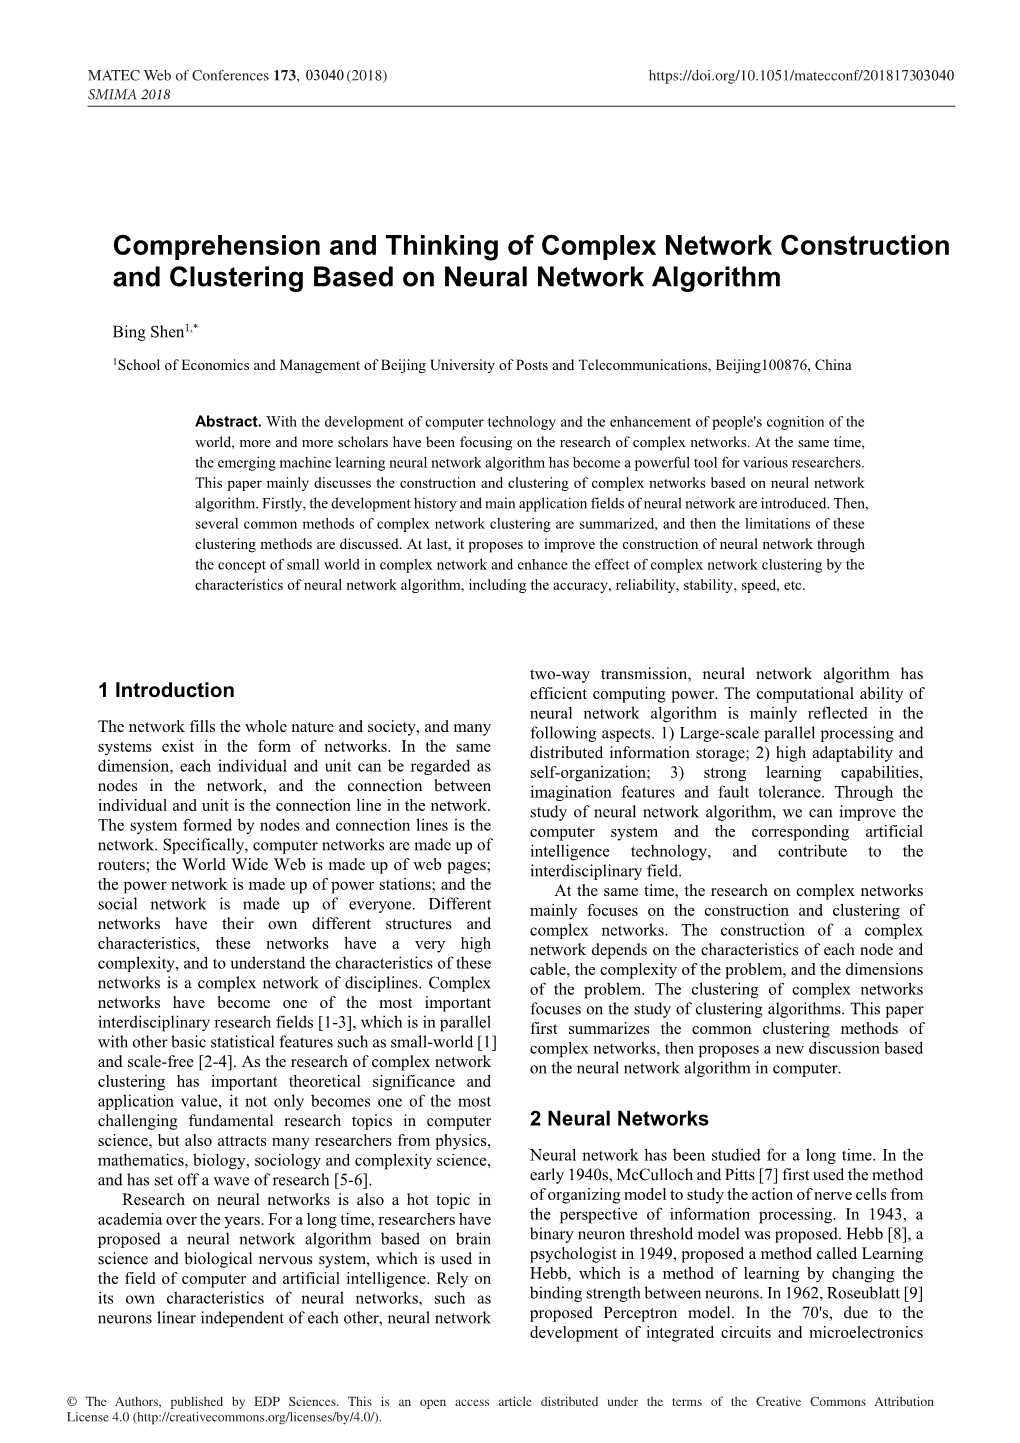 Comprehension and Thinking of Complex Network Construction and Clustering Based on Neural Network Algorithm